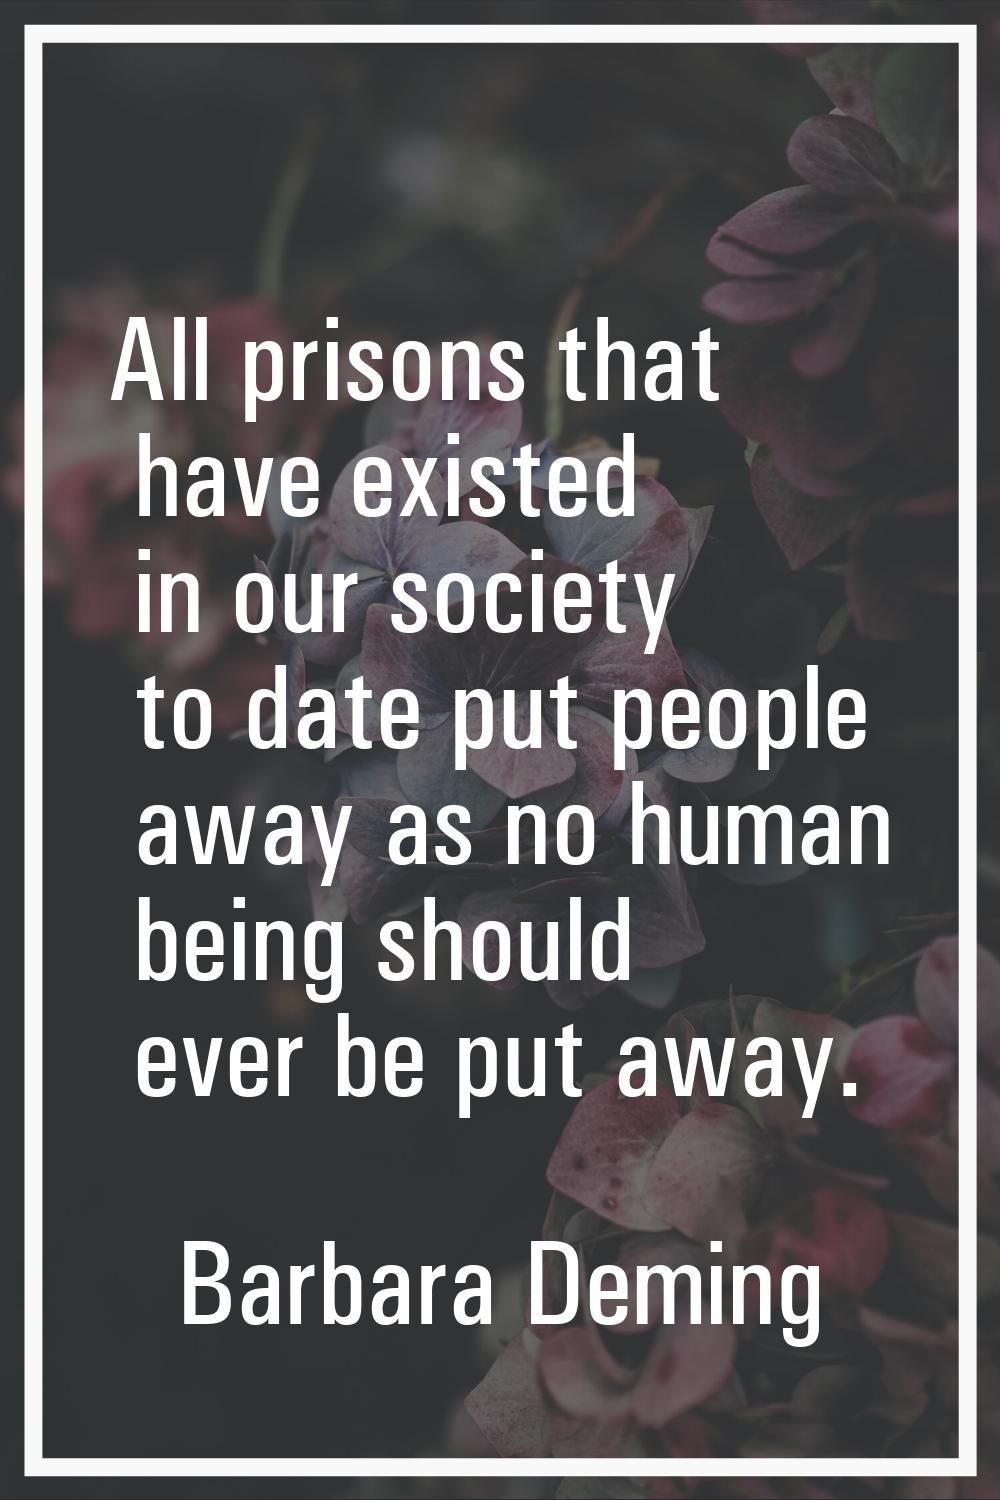 All prisons that have existed in our society to date put people away as no human being should ever 